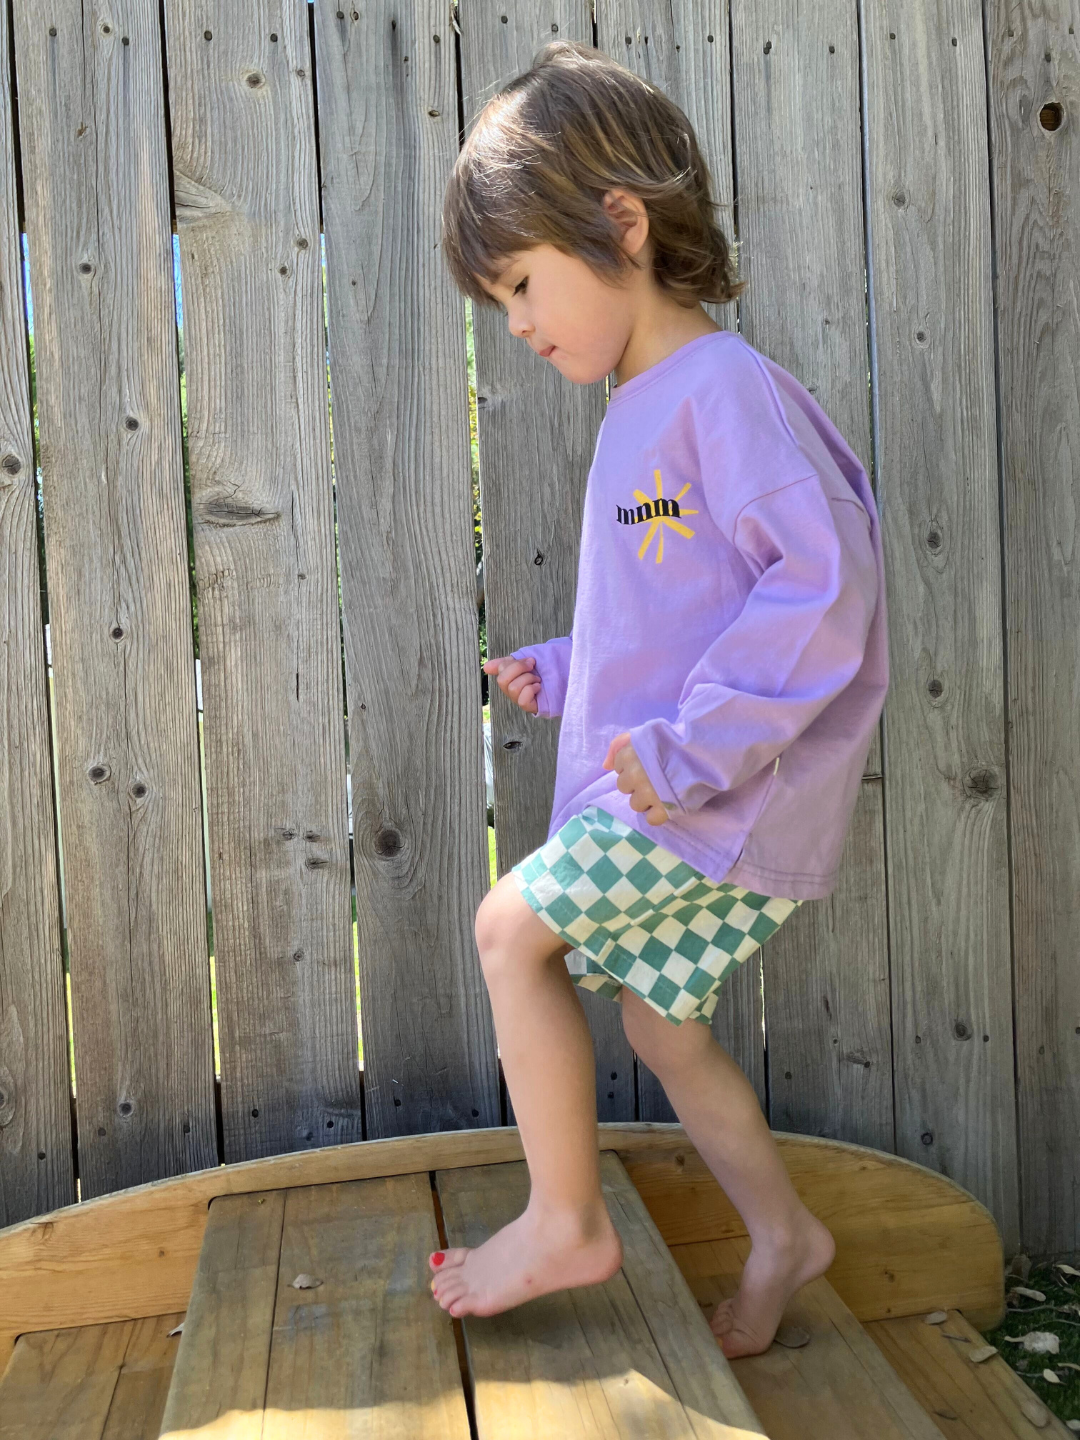 Purple | A child wearing the kids Minimal Longsleeve Tee in purple, paired with checkerboard patterned shorts in teal and ivory. He is clibing a small wooden step in front of a wooden fence.